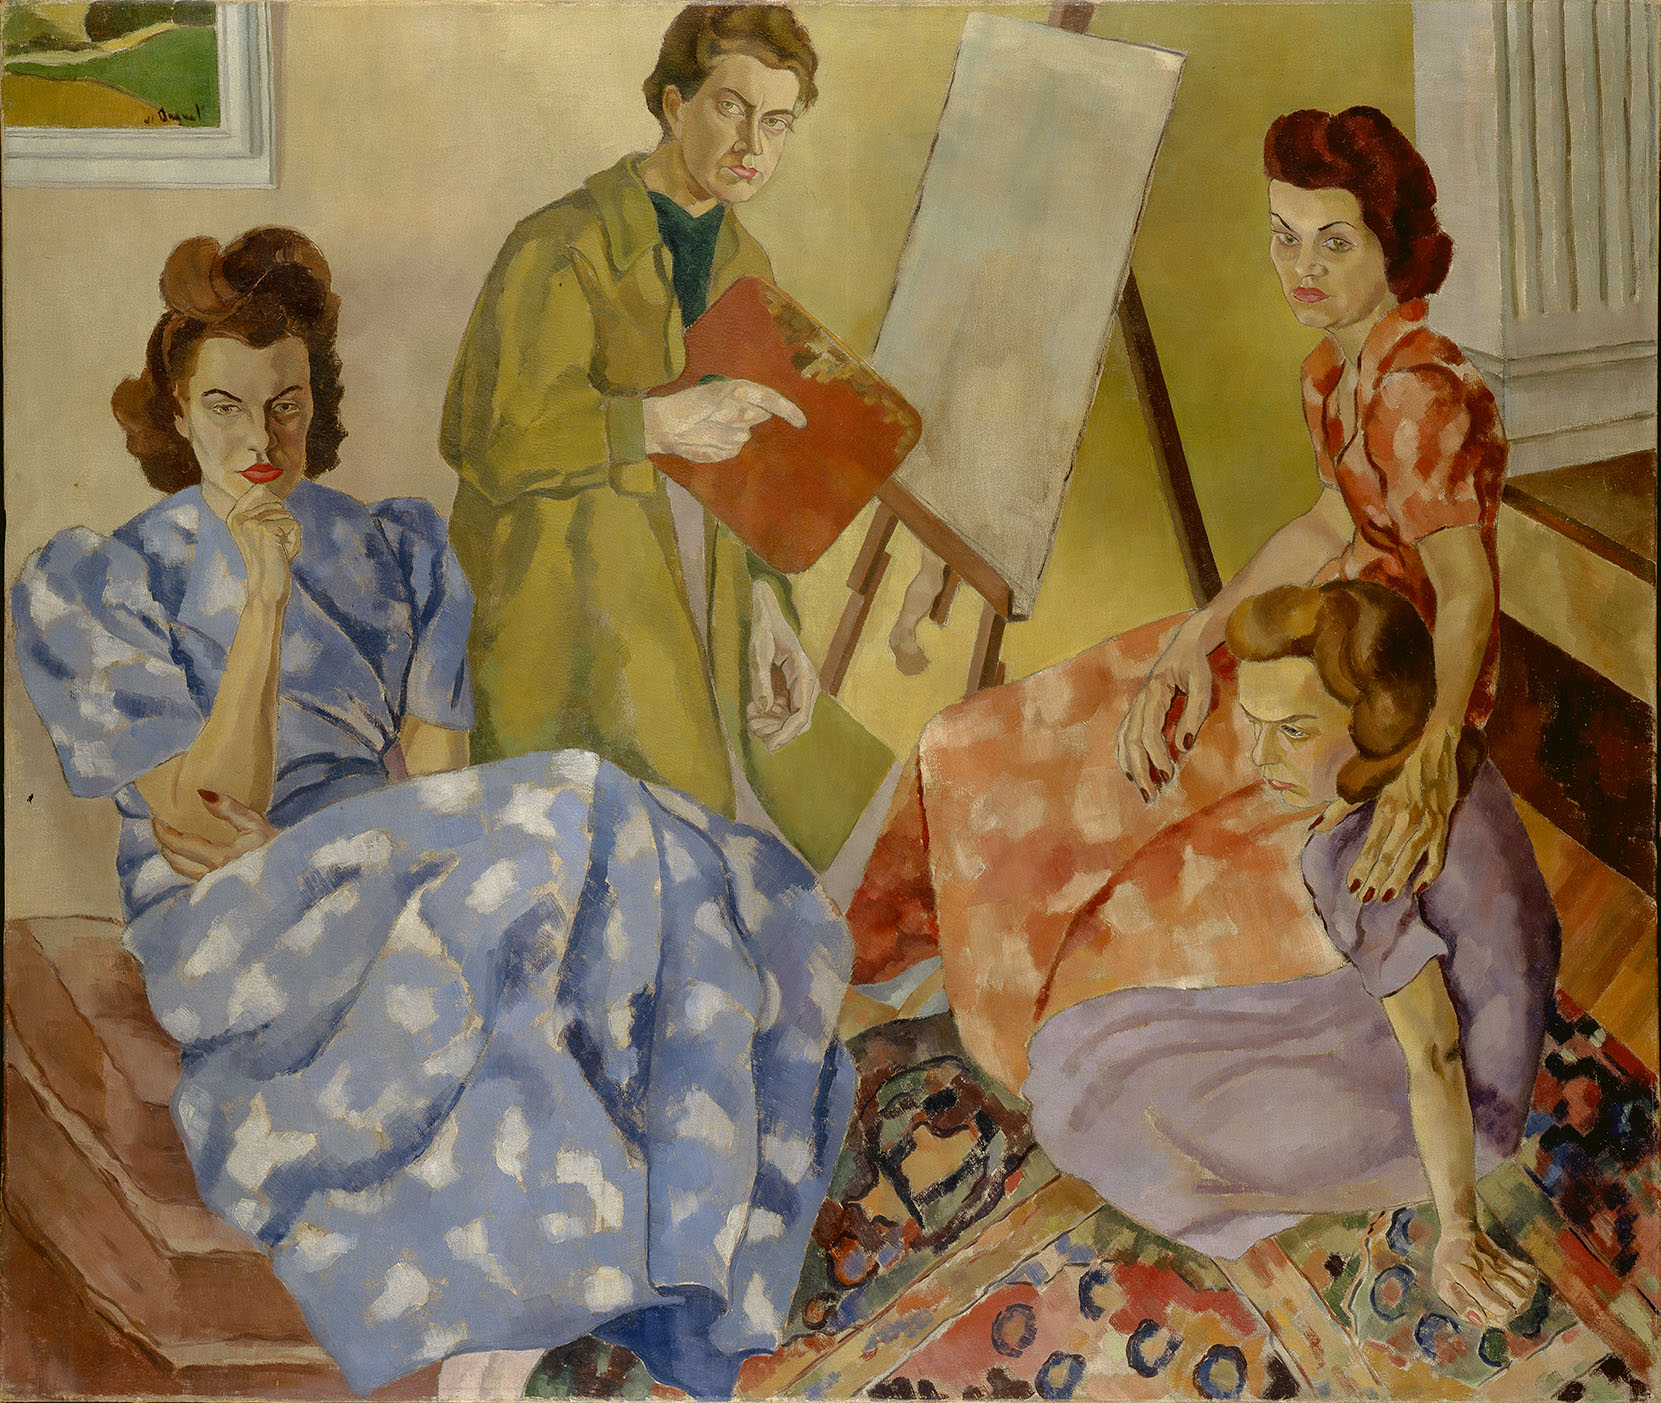 A self portrait of the artist surrounded by three women who are believed to be her sisters. They are sitting on a colourful patterned rug in a room that could be the artist’s studio. The artist sits in front of a blank canvas on an easel, she is wearing a trench coat or artist's smock. She looks directly at the viewer. The other three women are wearing colourful, more formal dresses and each one is looking in a different direction.